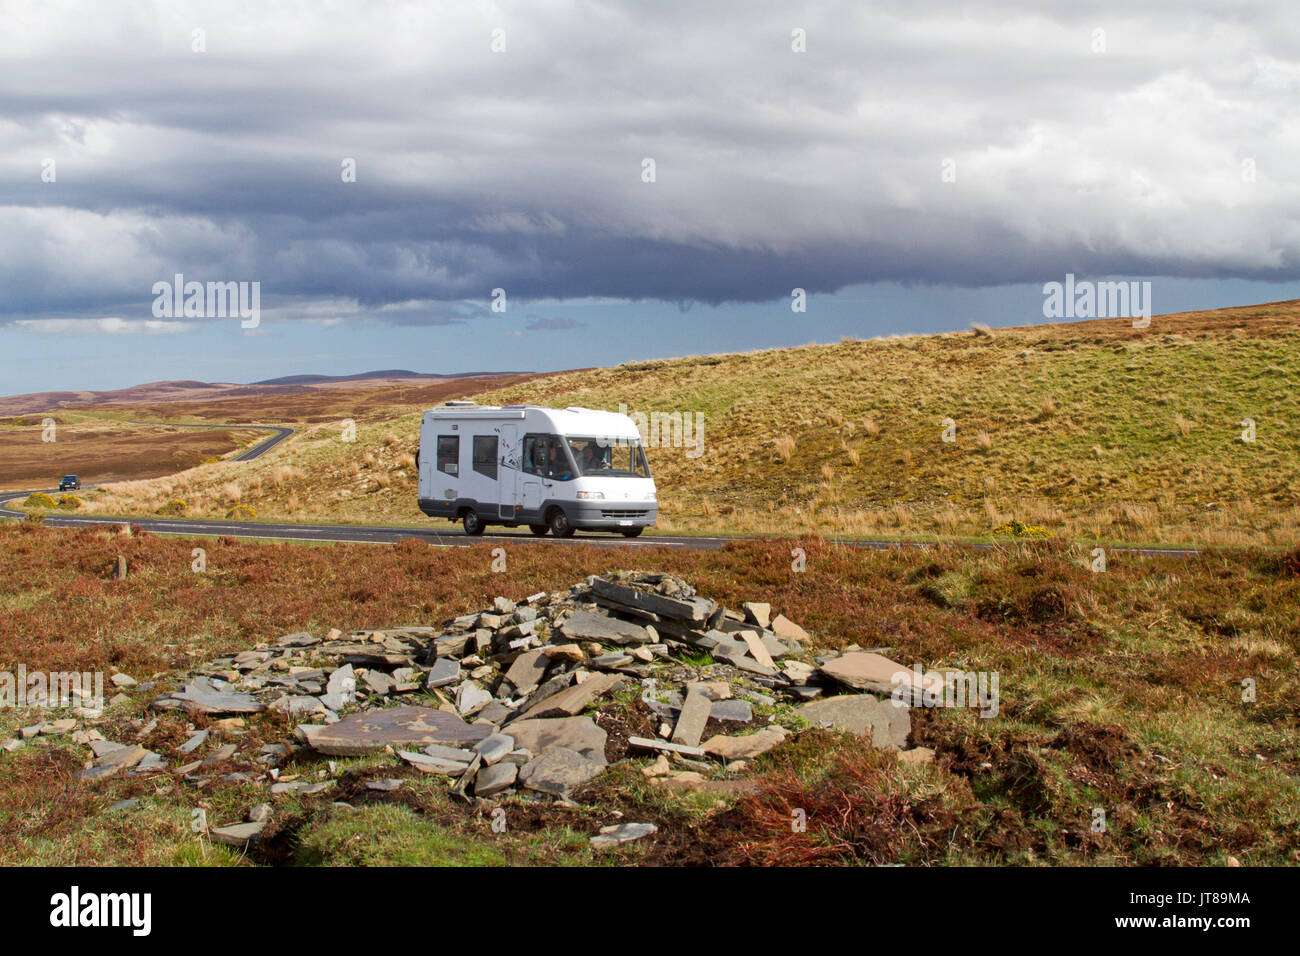 Motorhome on road slicing across vast and spectacular landscape of golden grasses and heather in Scottish highlands Stock Photo